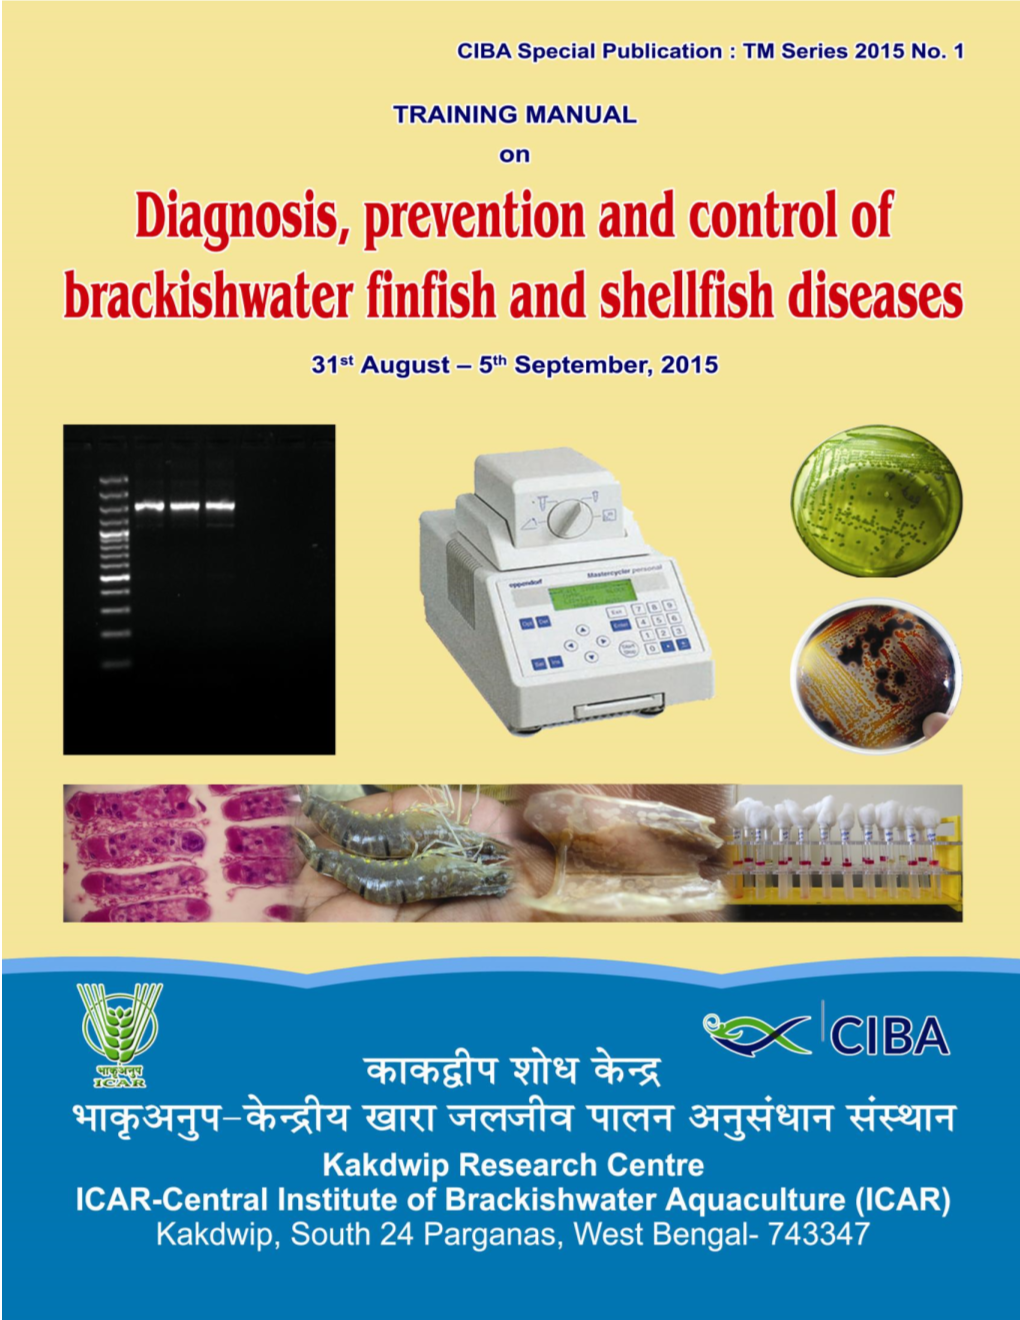 Diagnosis, Prevention and Control of Brackishwater Finfish and Shellfish Diseases